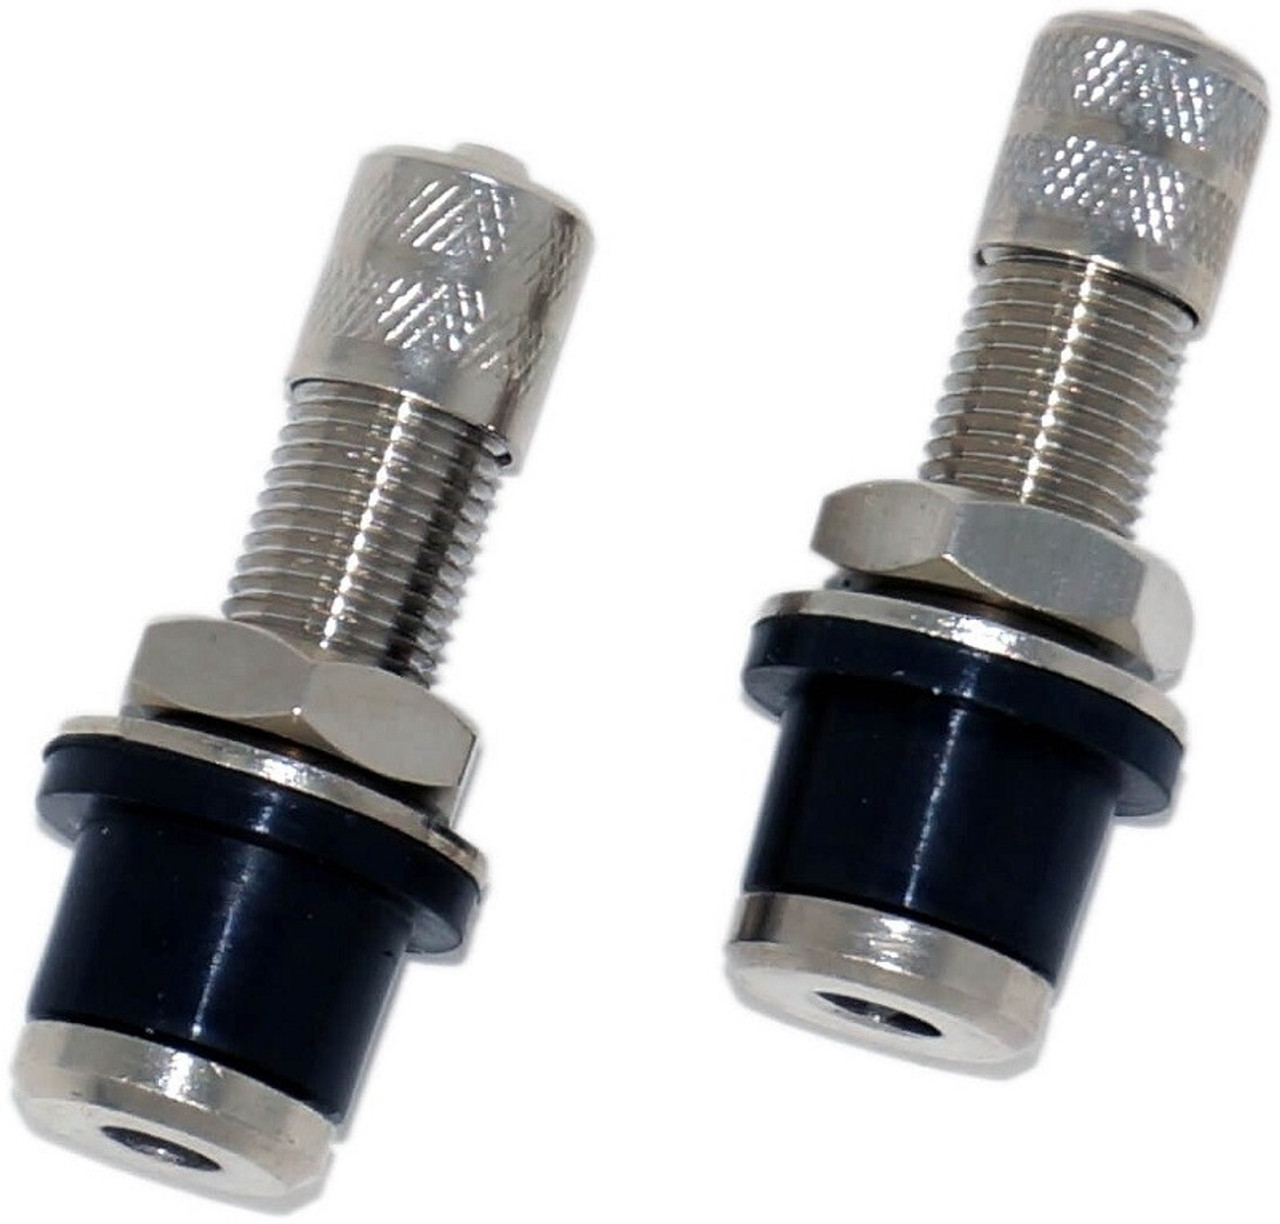 A&I Products: QuickStem Push-in Tire Valve Stem